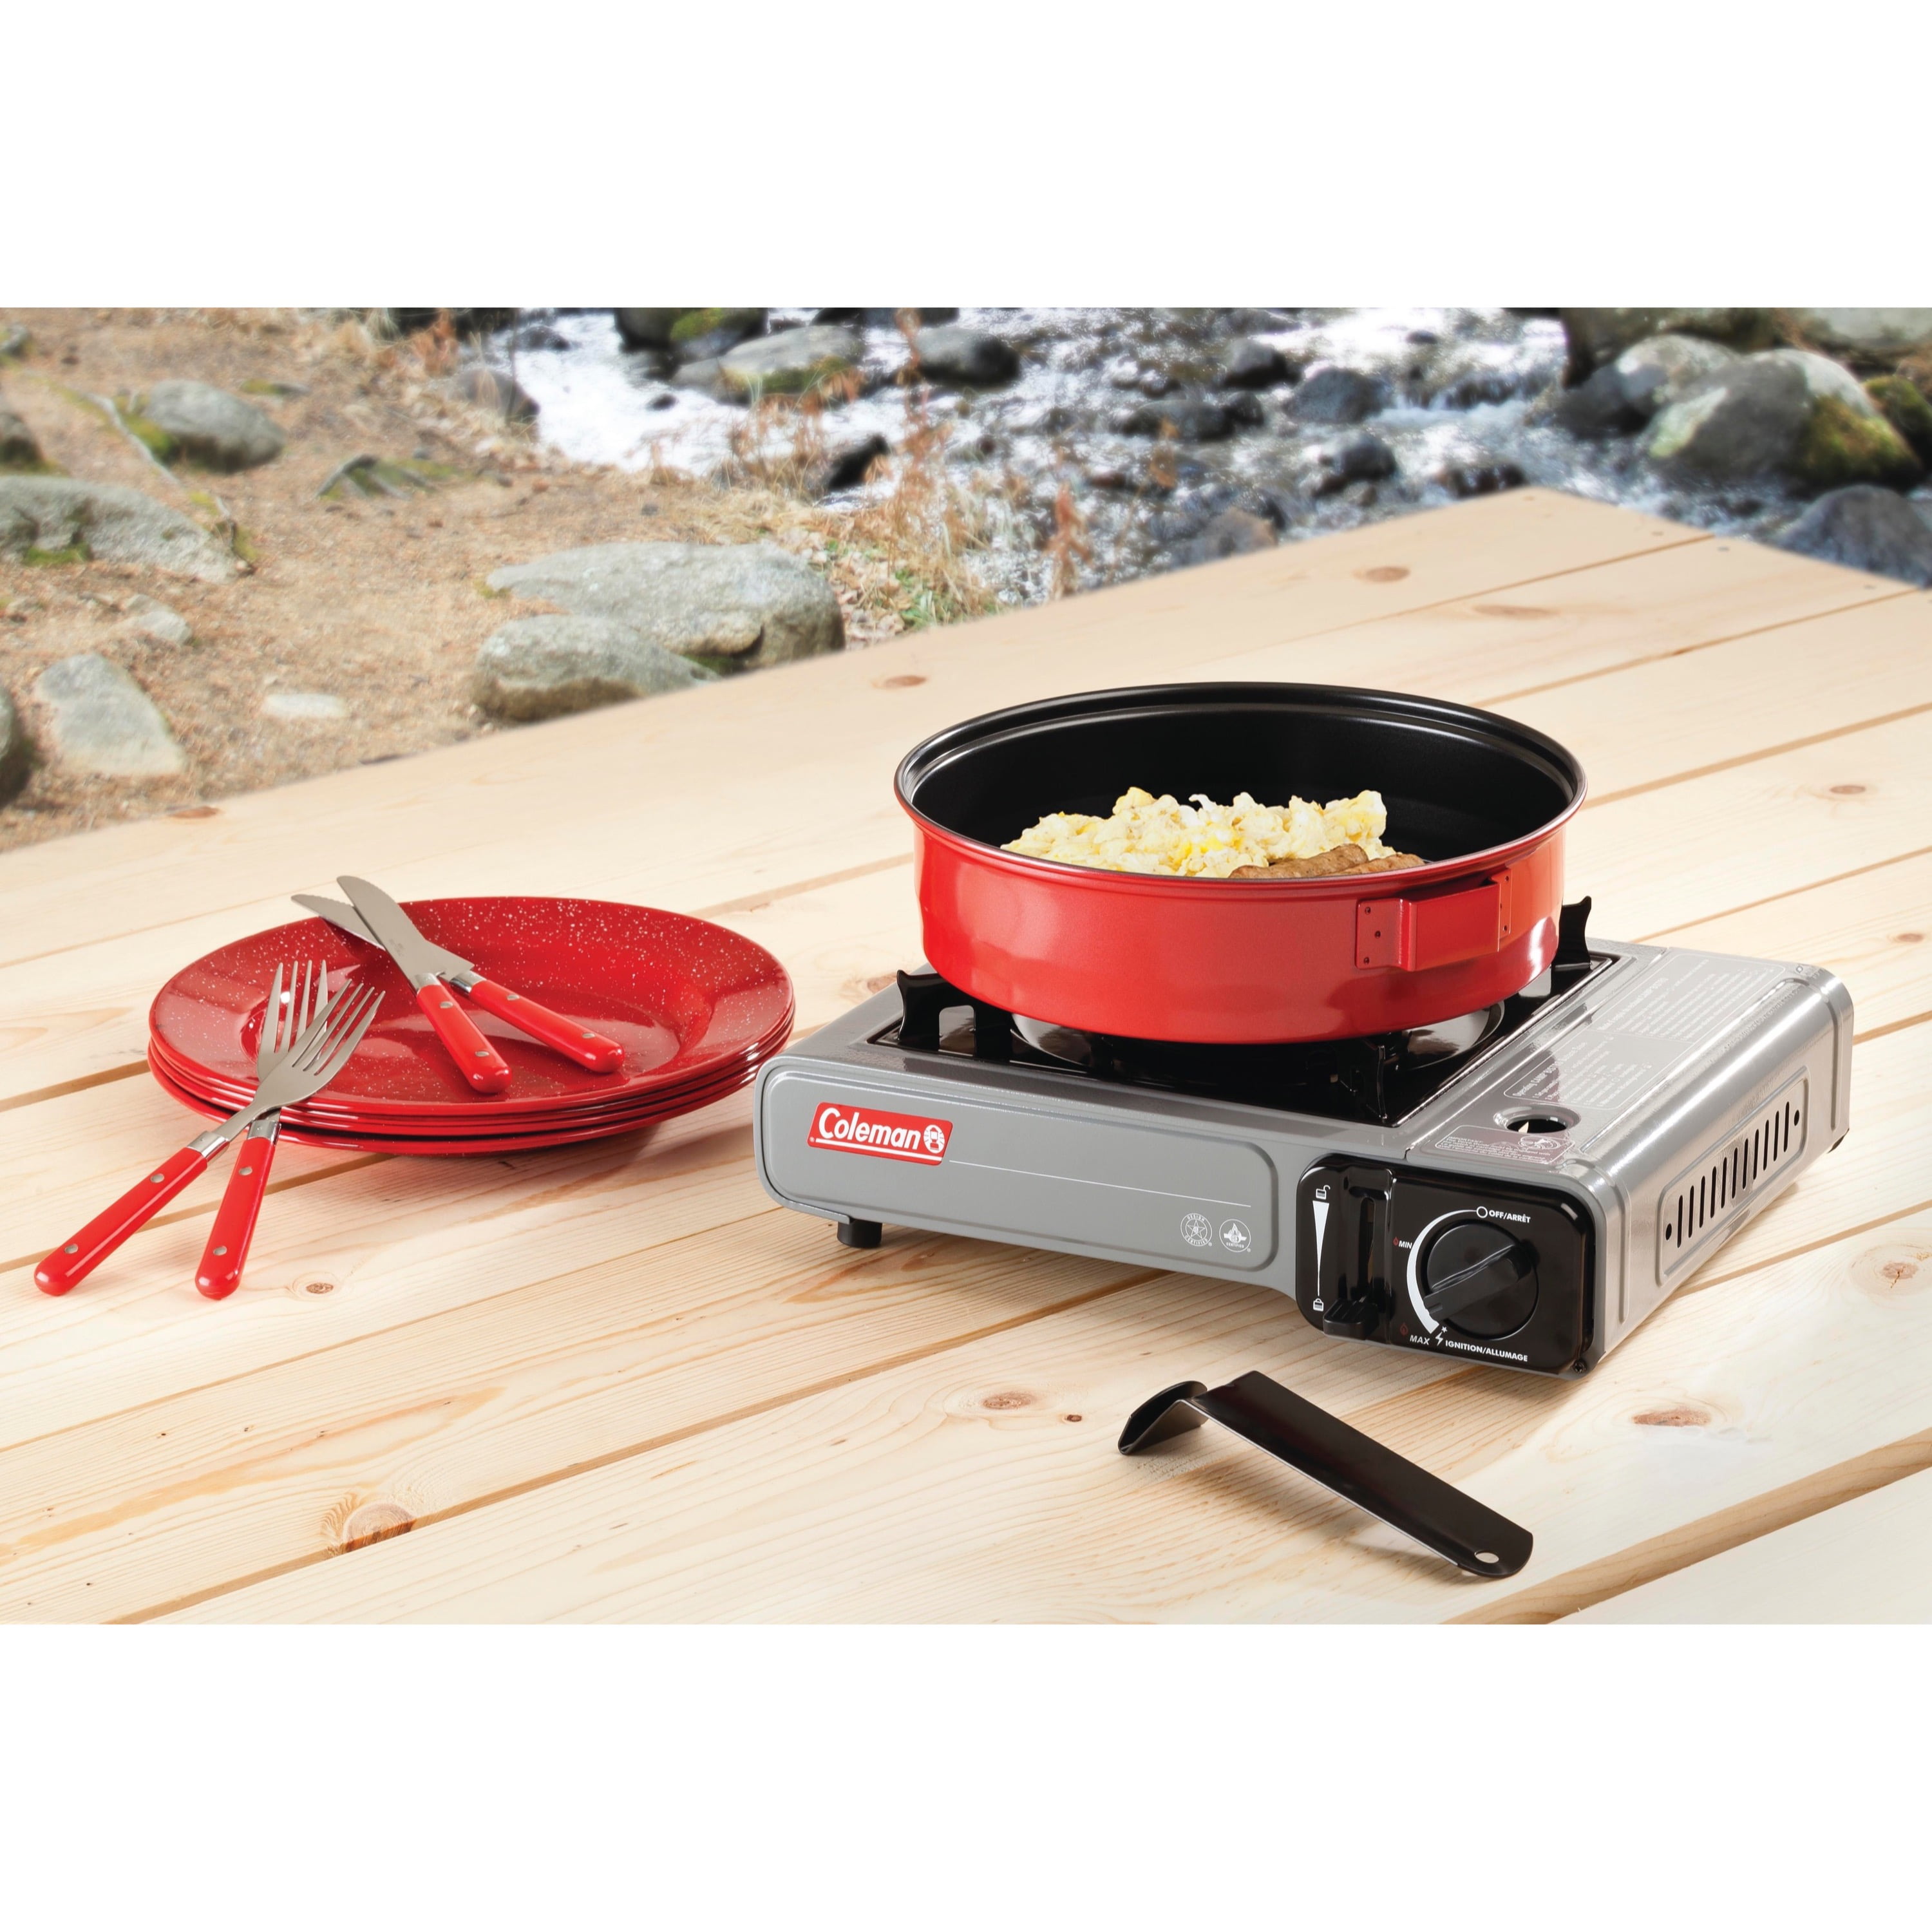 Camp Oven Stove 4 Solar Cookers Rice Hot Dogs Hamburger Coffee Educational Kit 